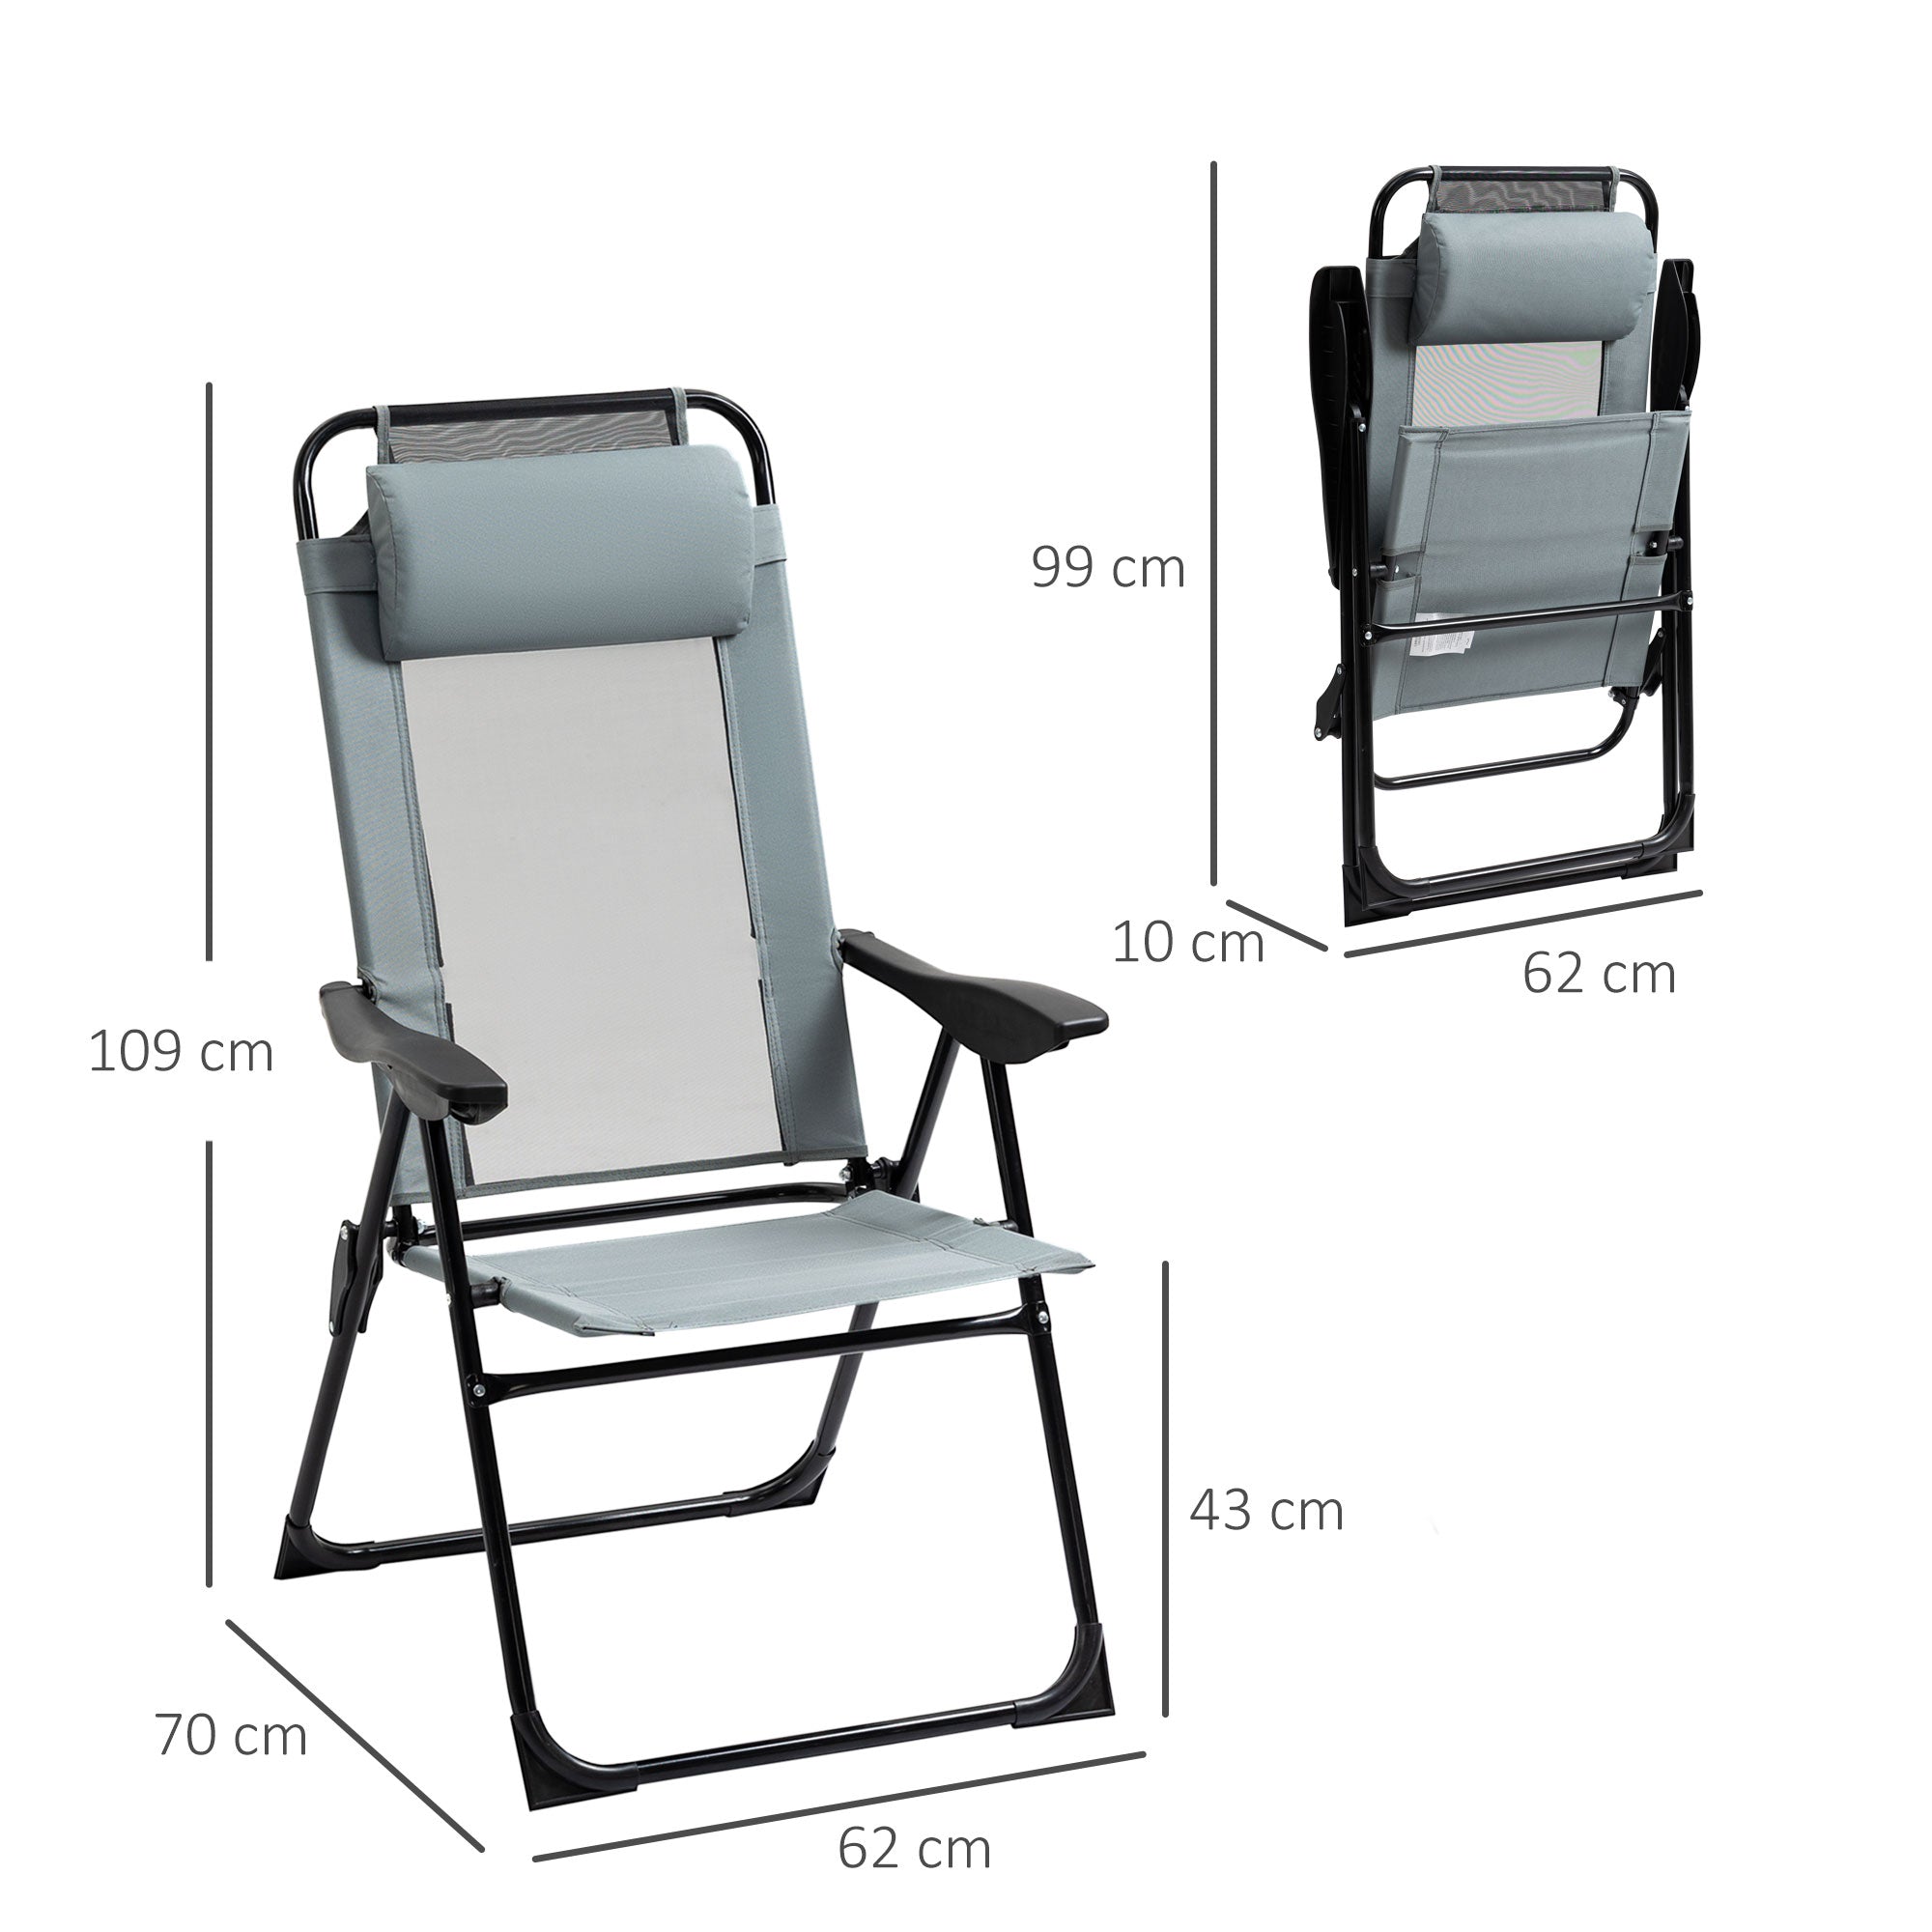 Set of 2 Portable Folding Recliner Chair Outdoor Patio Chaise Lounge Chair with Adjustable Backrest, Grey-2